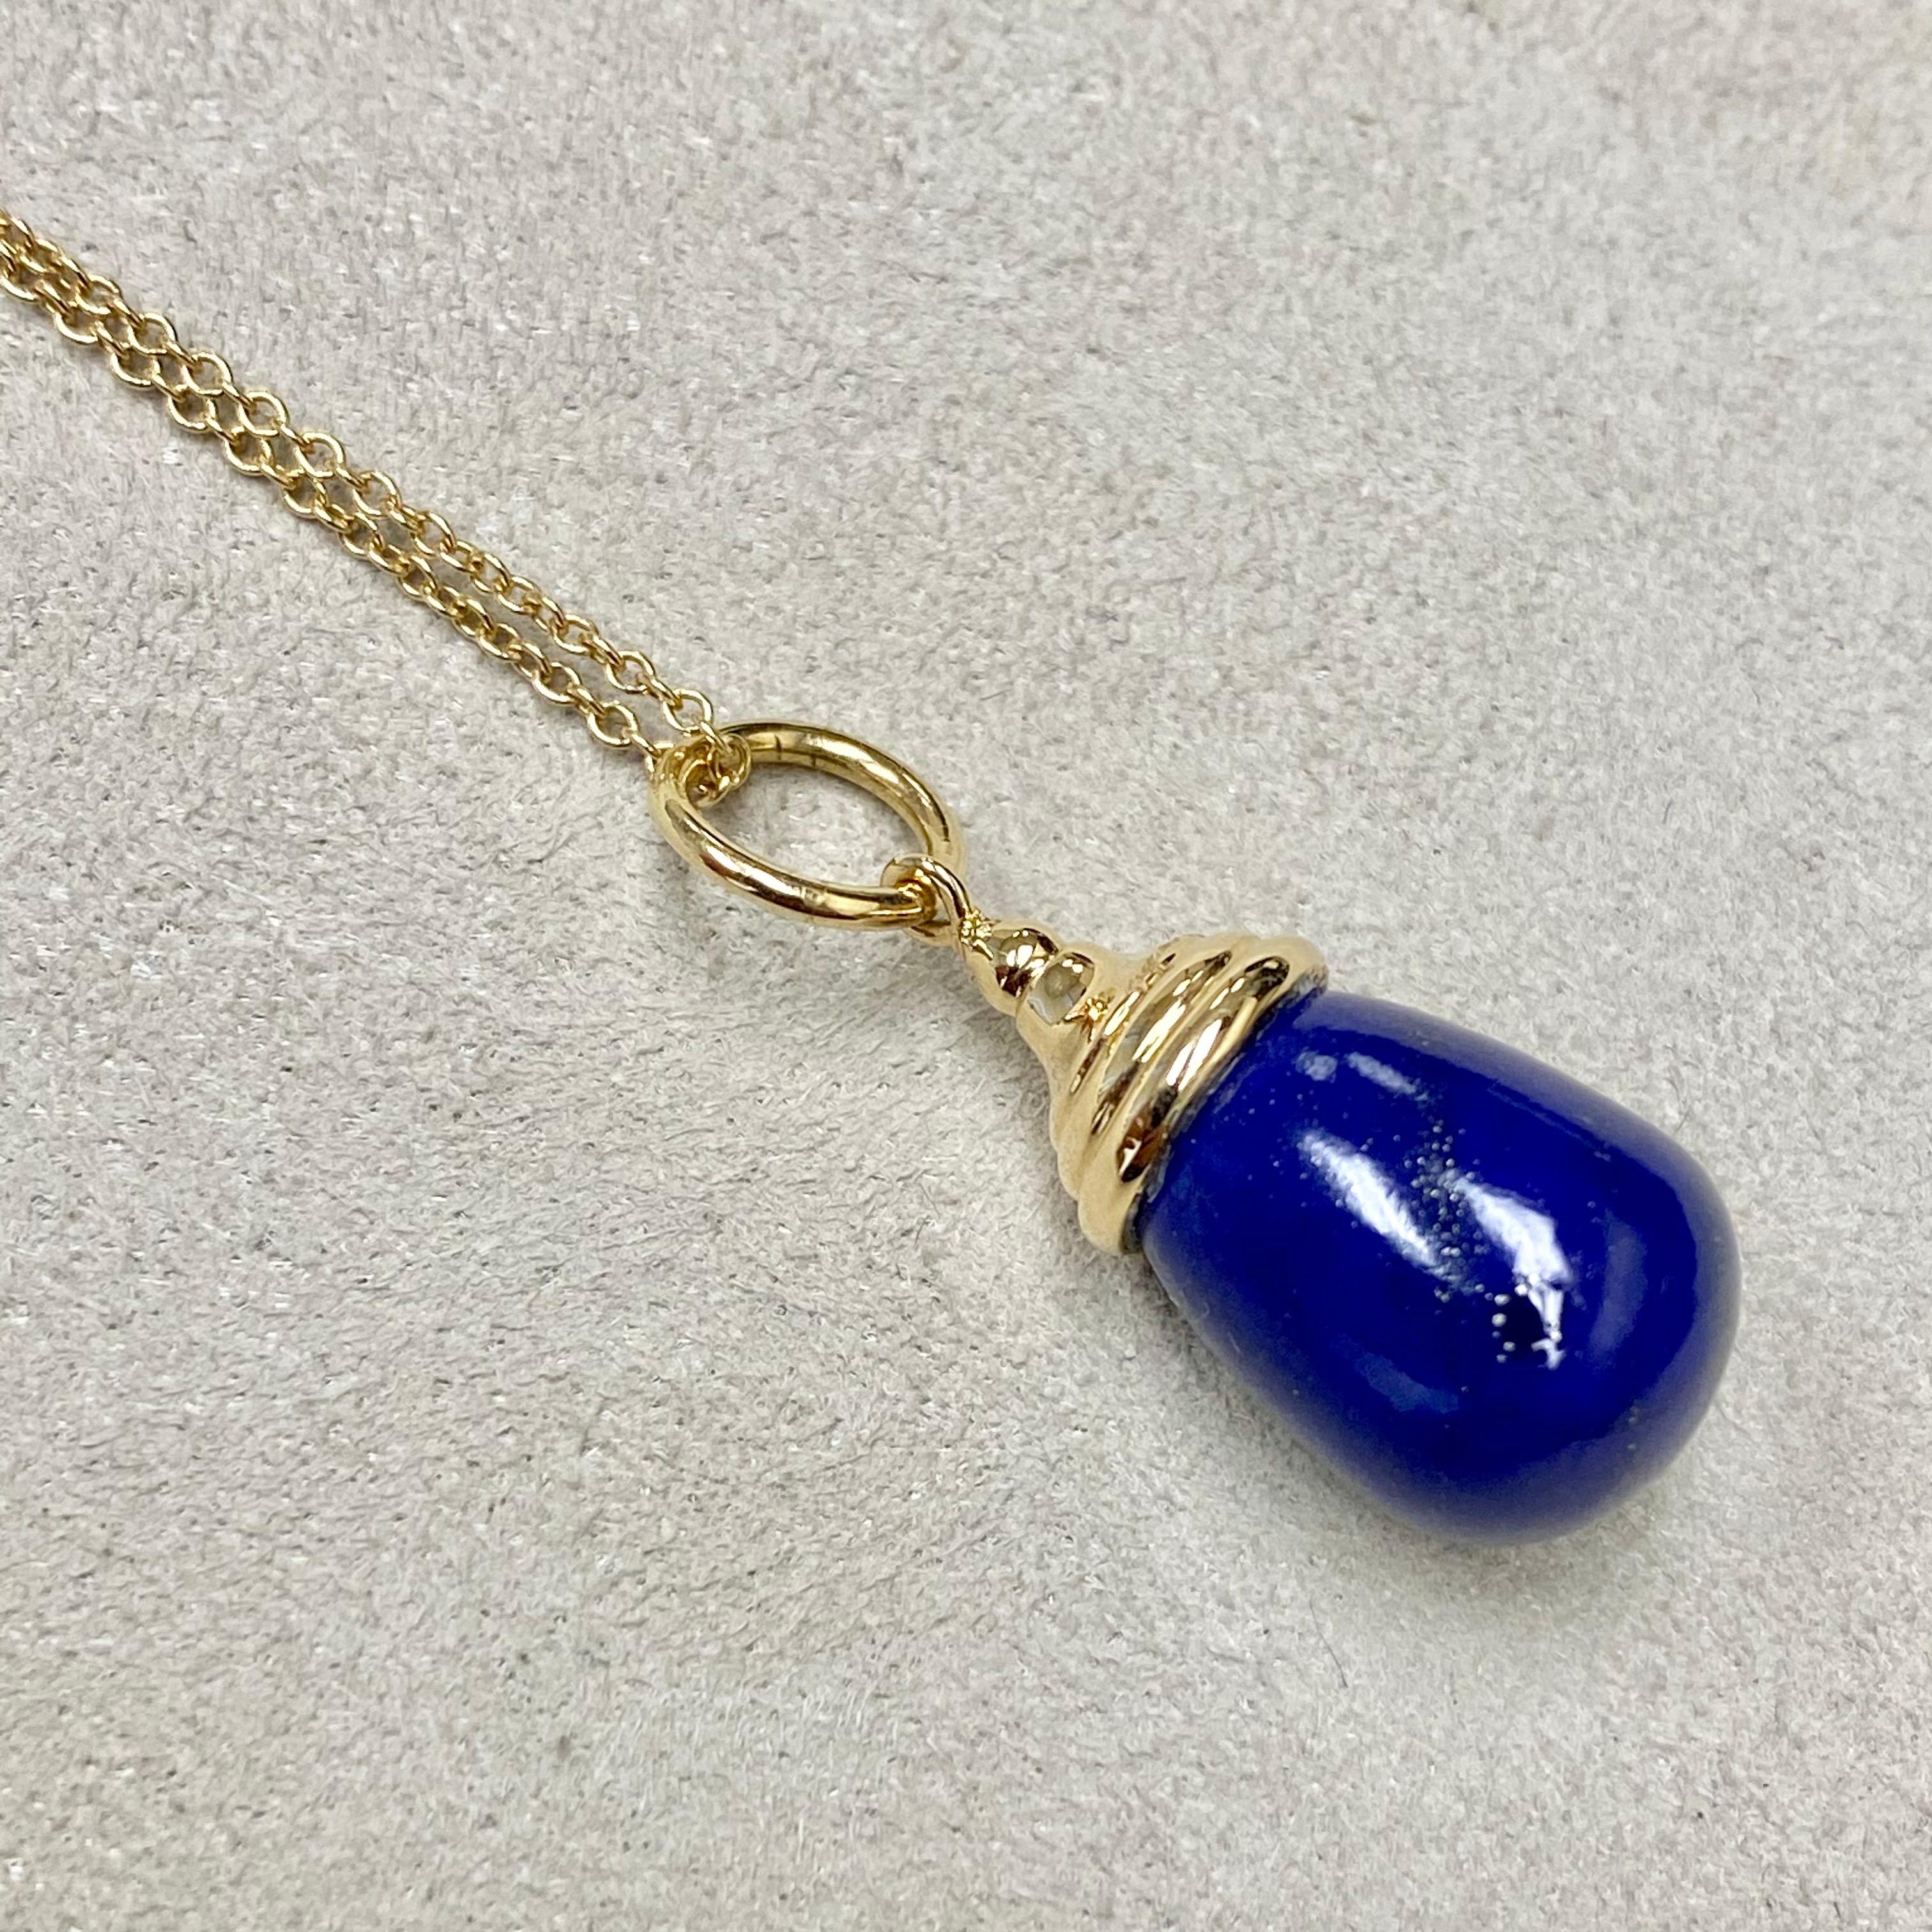 Created in 18 karat yellow gold 
Lapis Lazuli 12 cts approx
Chain sold separately

Crafted from lustrous 18 karat yellow gold, this impressive pendant showcases an impressive Lapis Lazuli, estimated at 12 carats, with a chain sold separately.

About